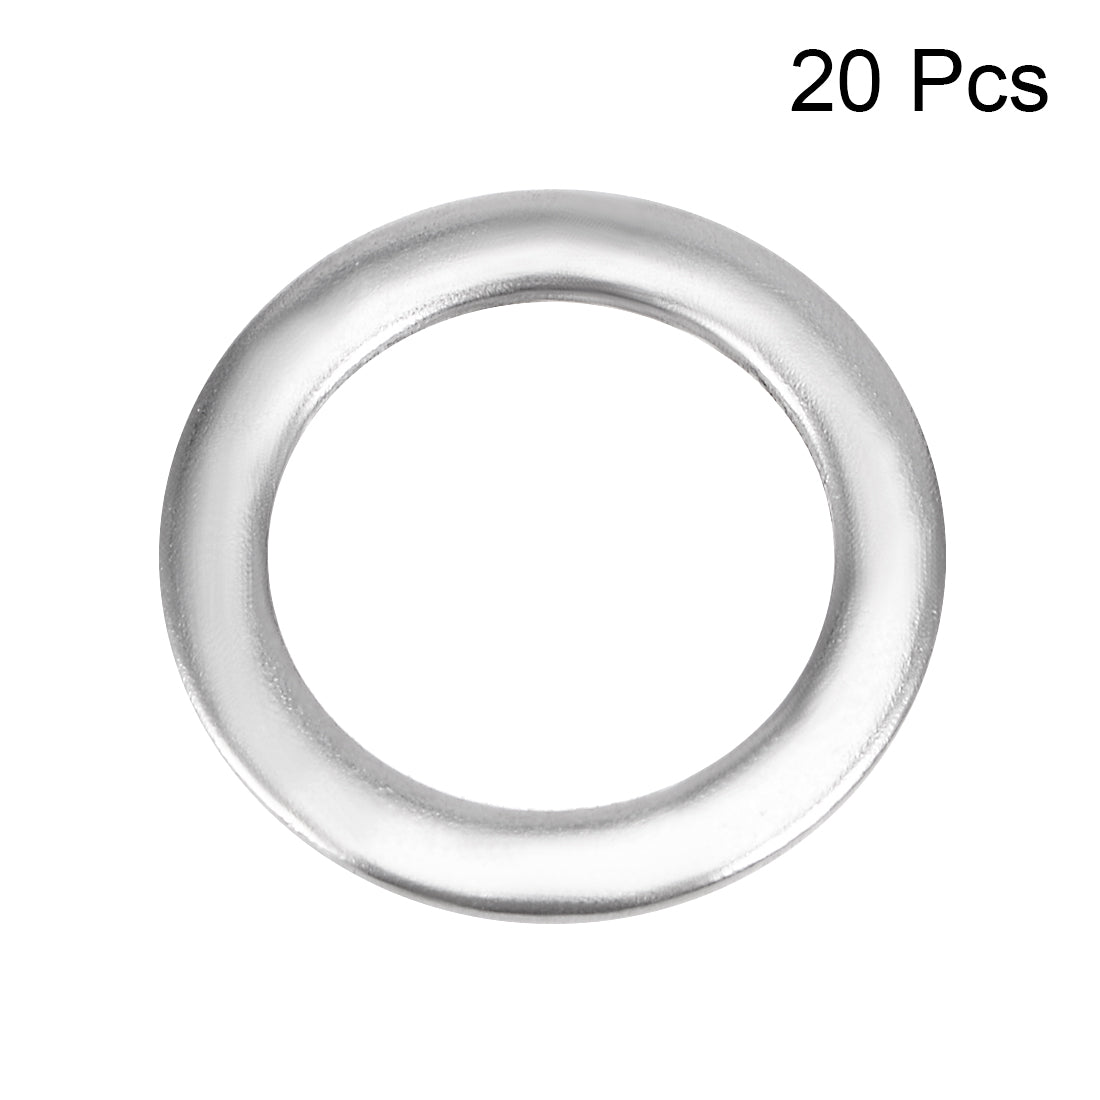 uxcell Uxcell 20 Pcs 12mm x 8.5mm x 0.8mm 304 Stainless Steel Flat Washer for Screw Bolt